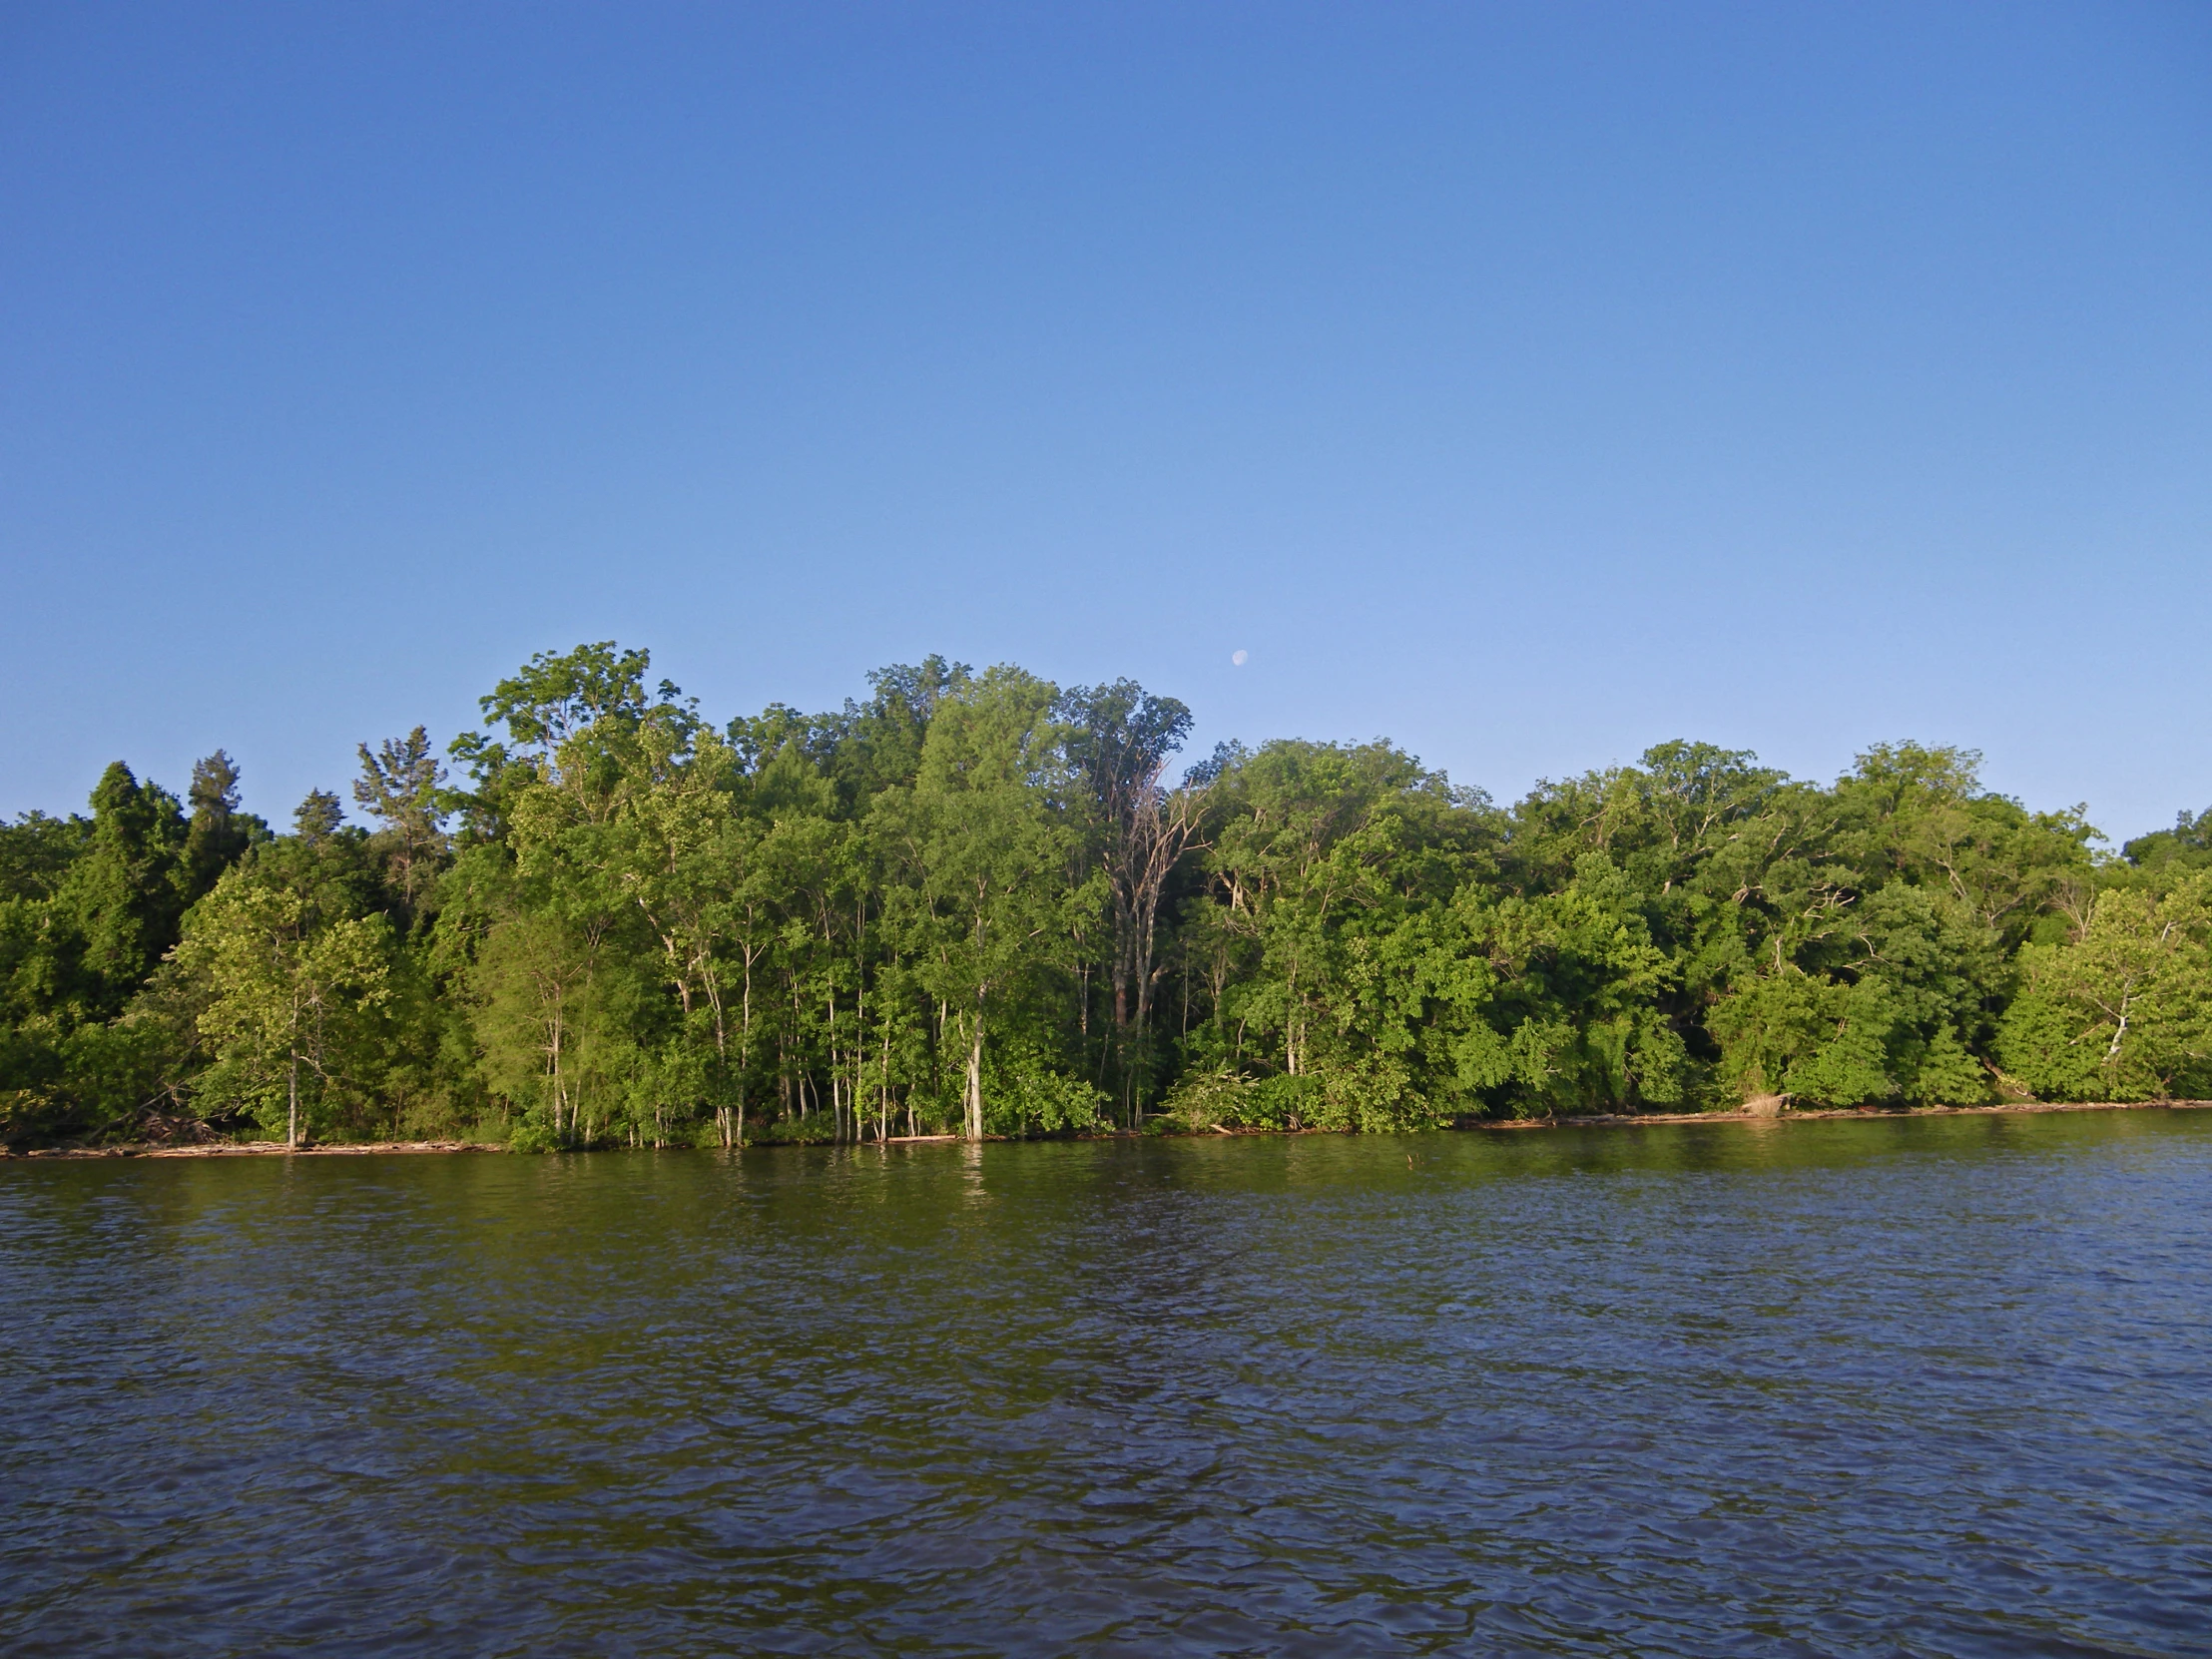 a view of a lake with some trees